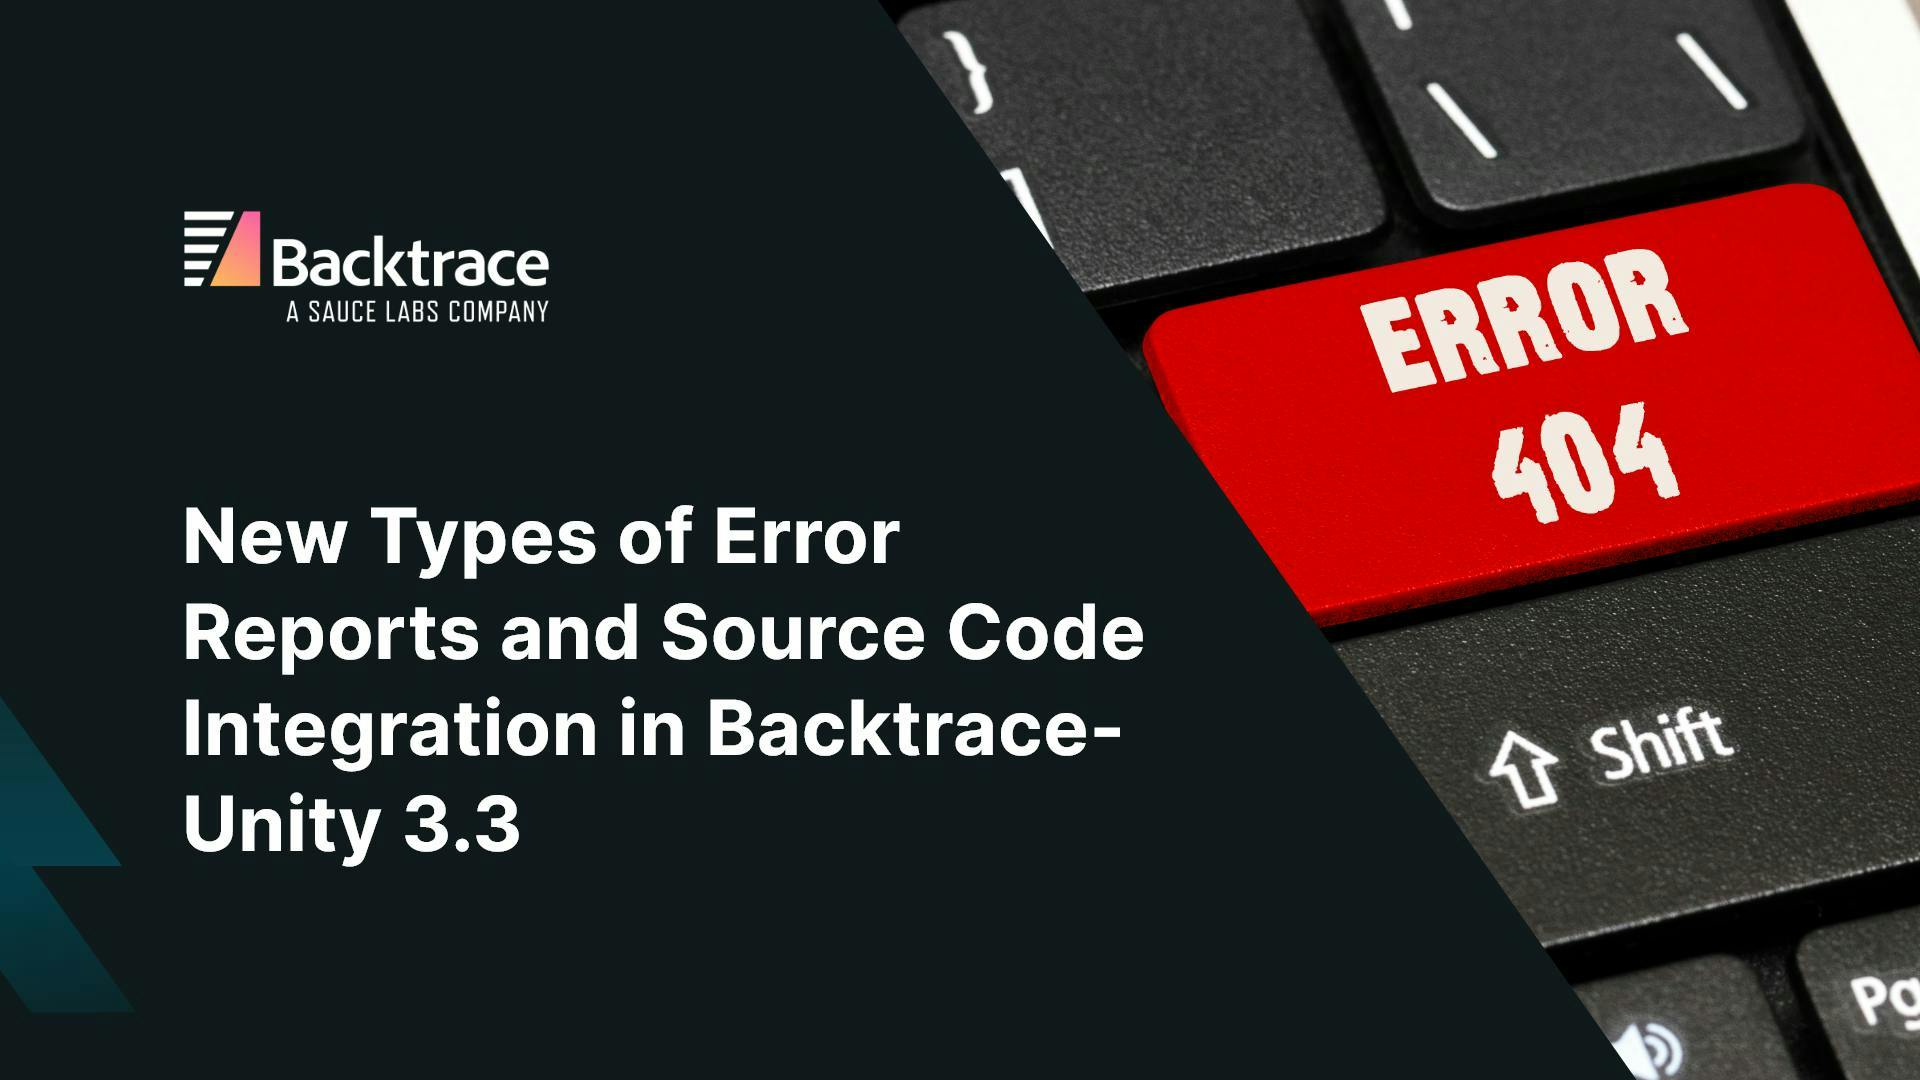 Thumbnail image for blog post: New Types Of Error Reports And Source Code Integration With Backtrace-Unity 3.3